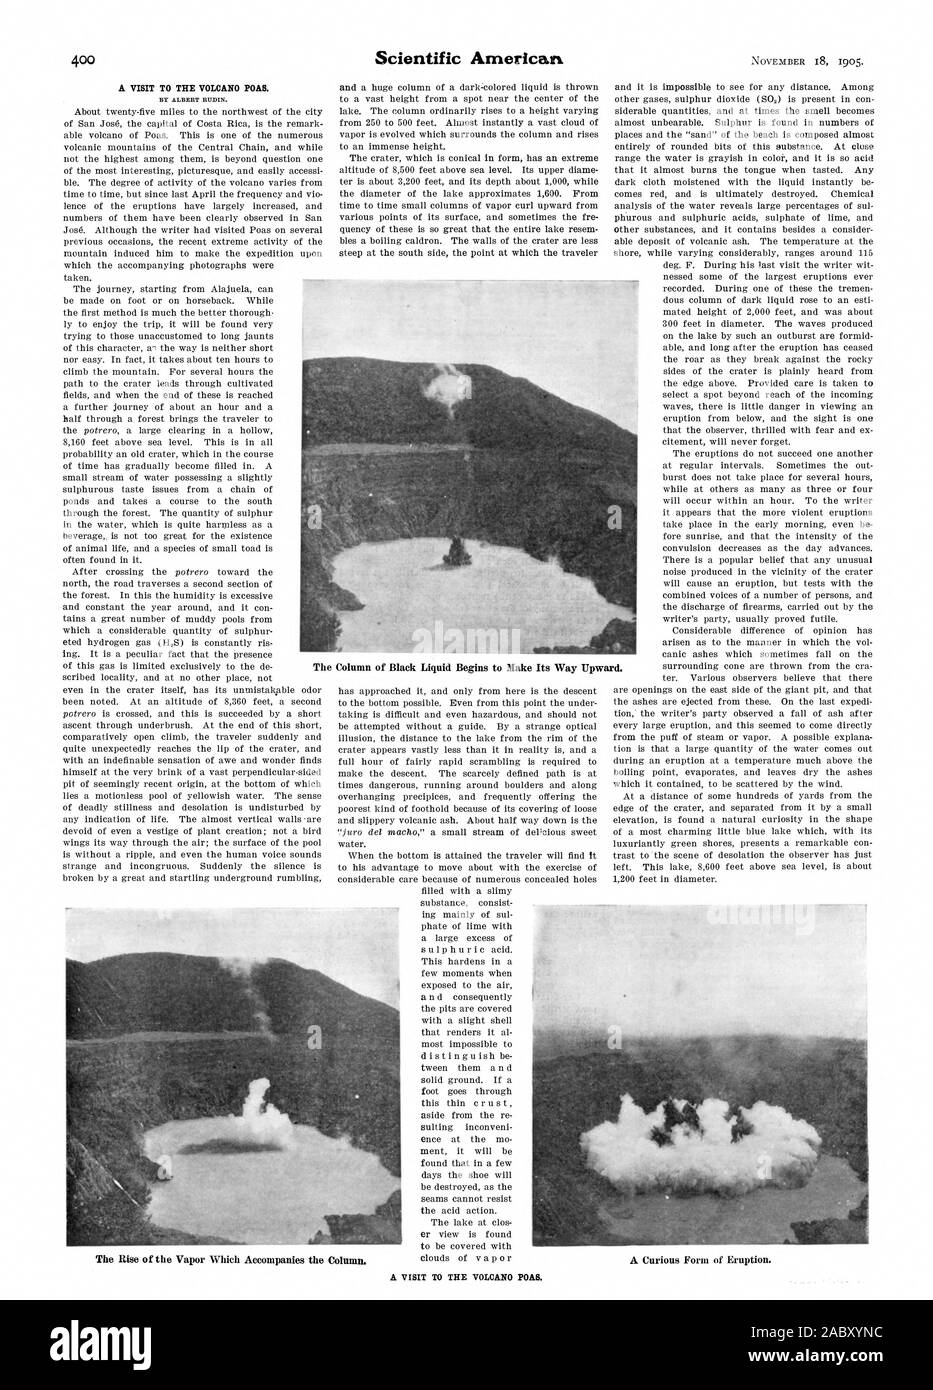 A VISIT TO THE VOLCANO POAS. BY ALBERT RUBIN. The Column of Black Liquid Begins to Make Its Way Upward. A Curious Form of Eruption. A VISIT TO THE VOLCANO POAS., scientific american, 1905-11-18 Stock Photo